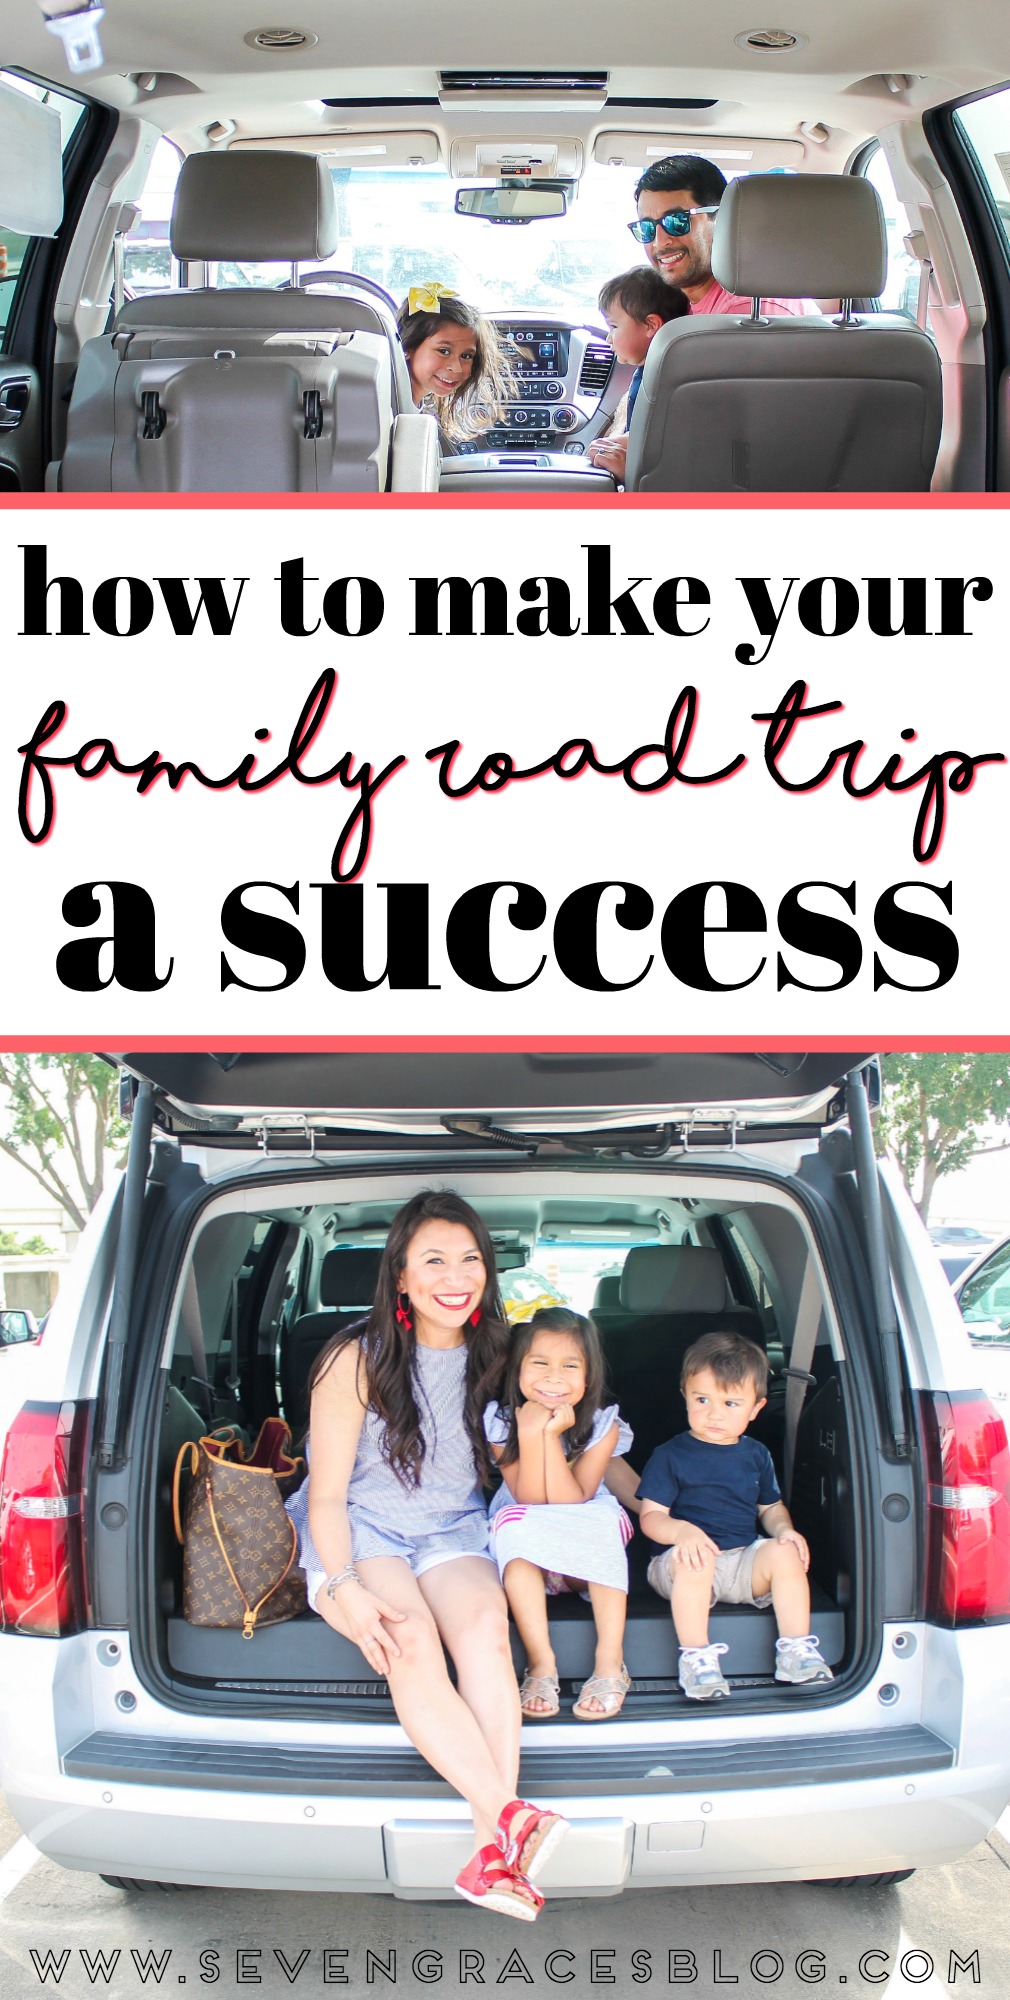 How to Make Your Family Road Trip a Success! All the best tips detailing what you'll need for a successful road trip!